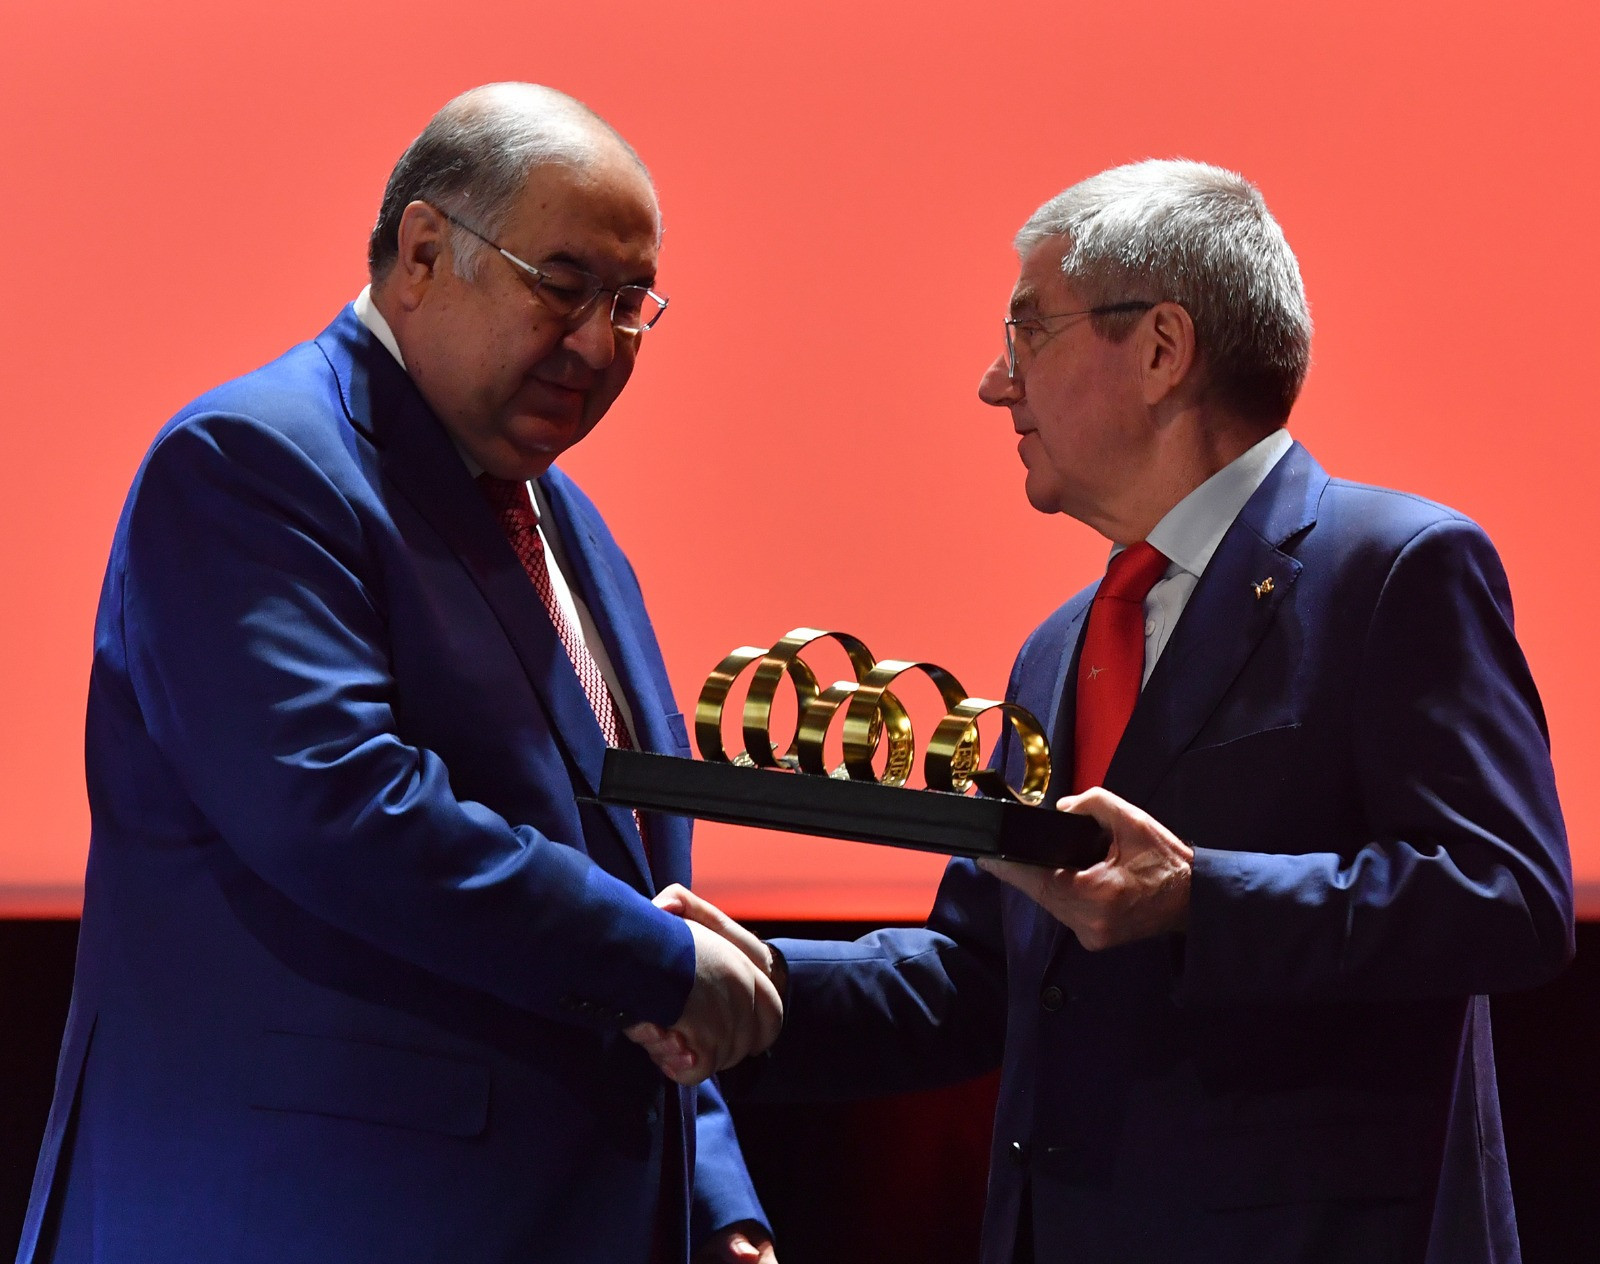 Alisher+Usmanov+gives+award+to+Thomas+Bach+FIE+Congress+Lausanne+ ...